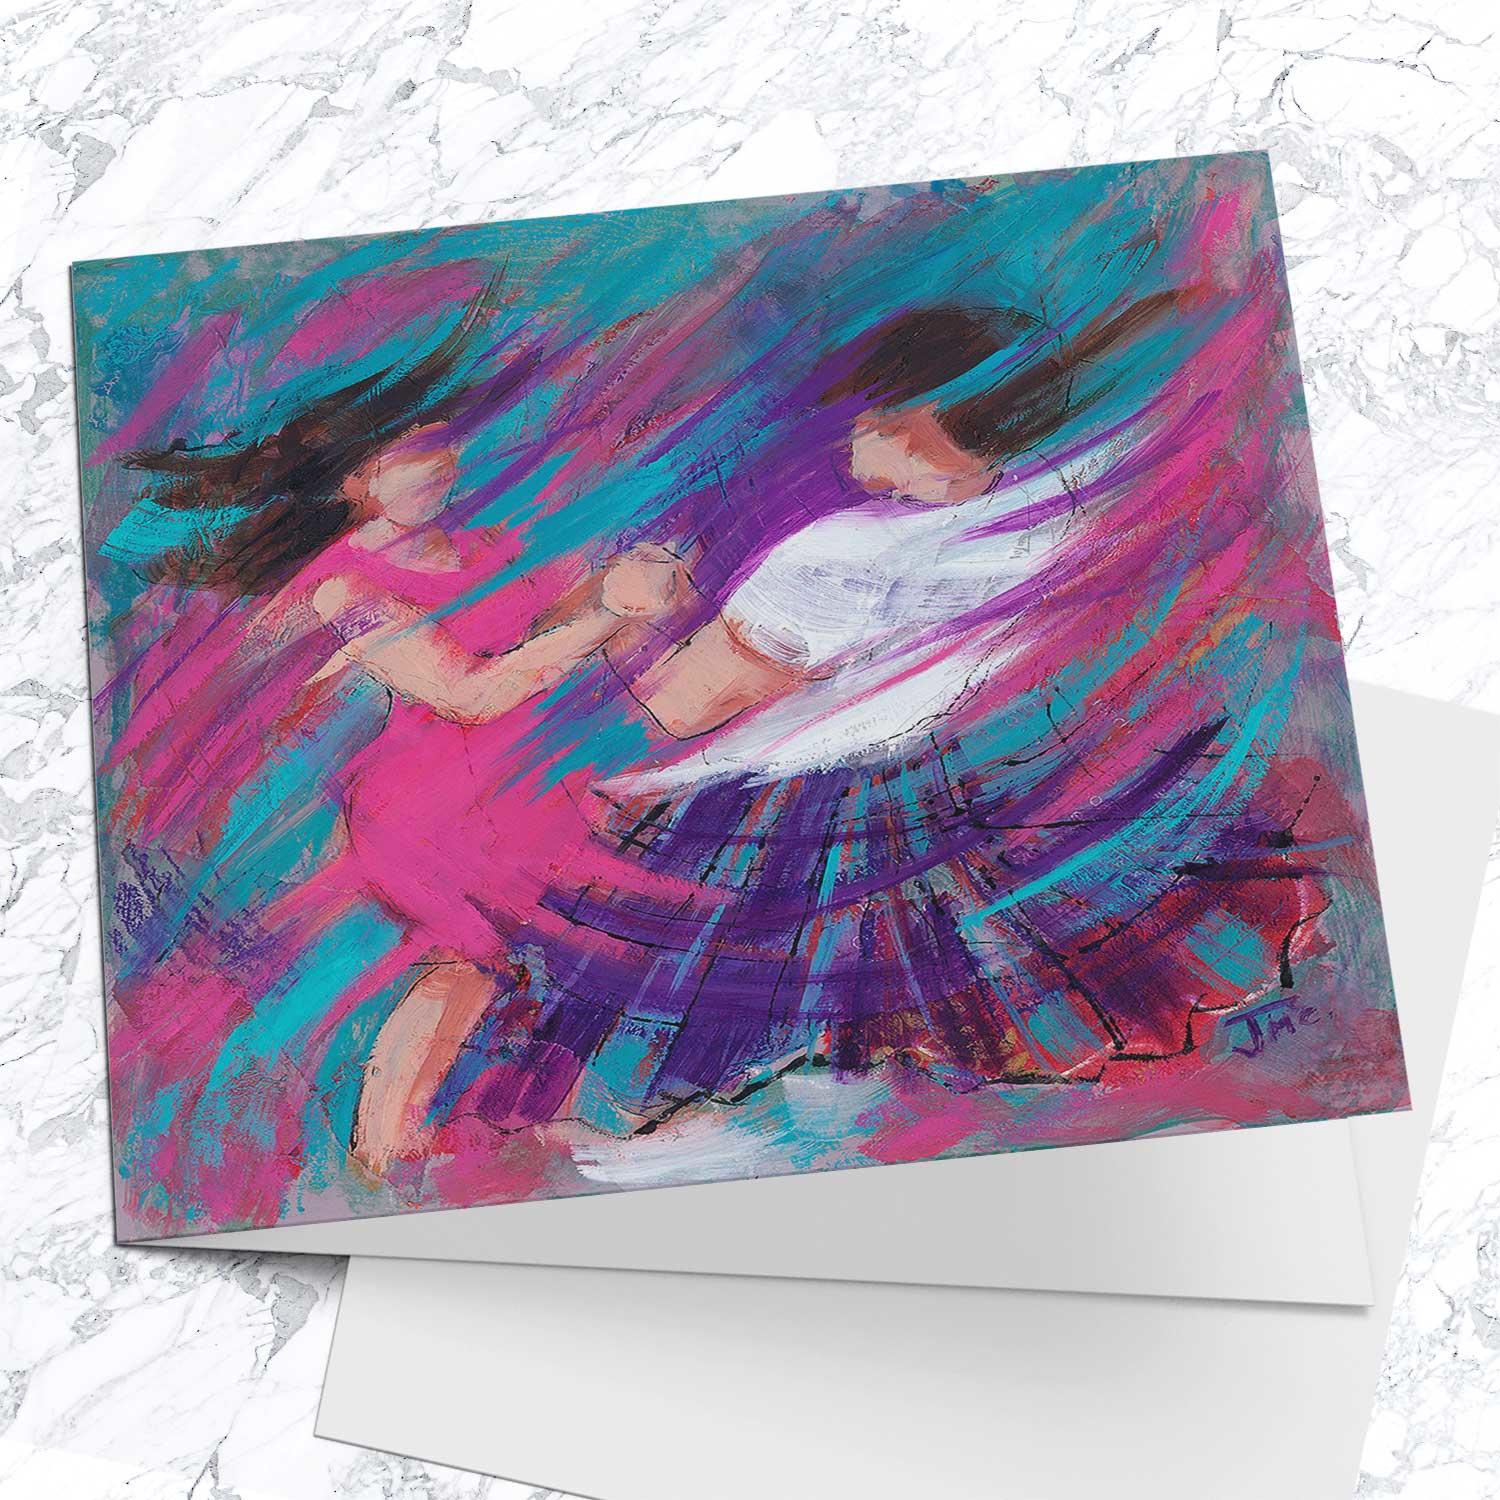 Streaky Pink Greeting Card from an original painting by artist Janet McCrorie